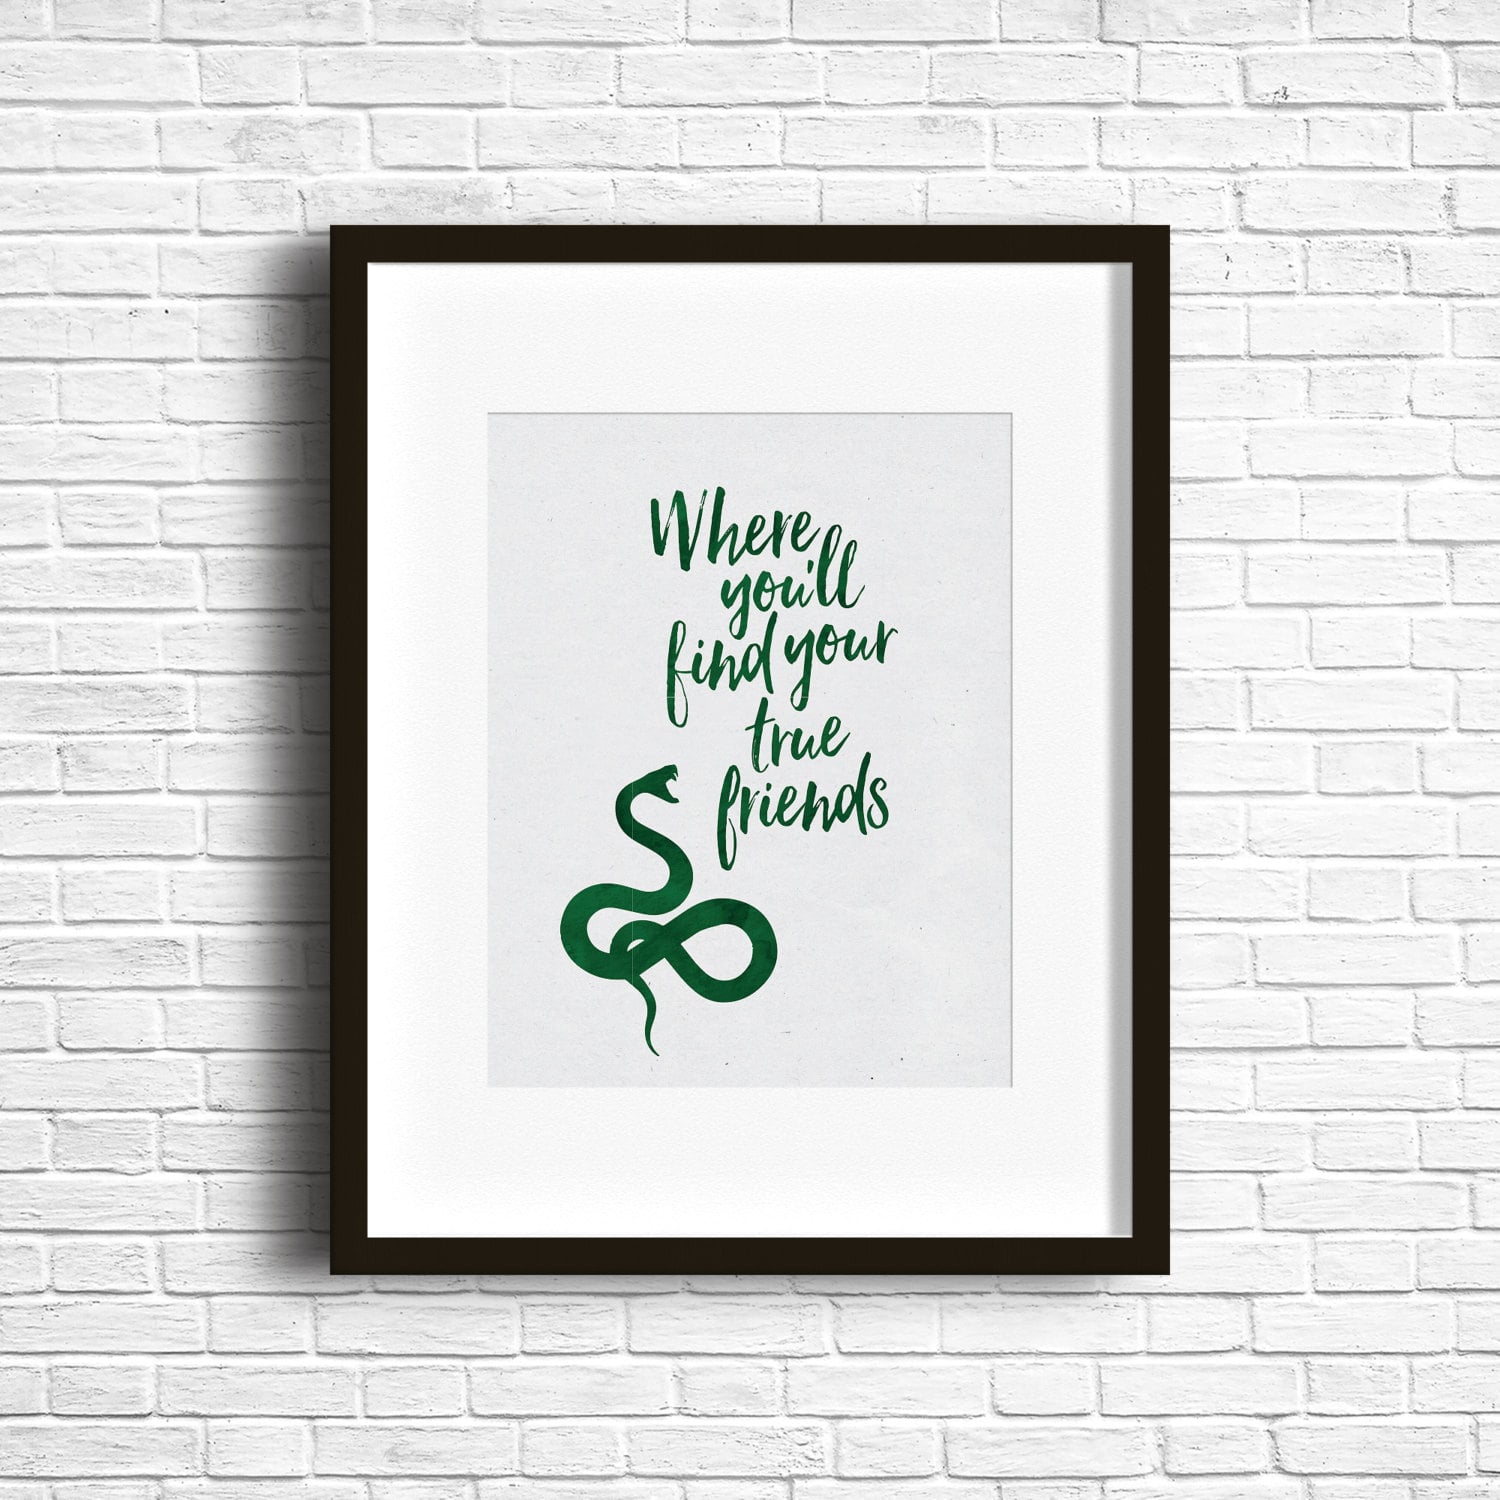 Or perhaps in Slytherin you'll your real friends metal sign wall art